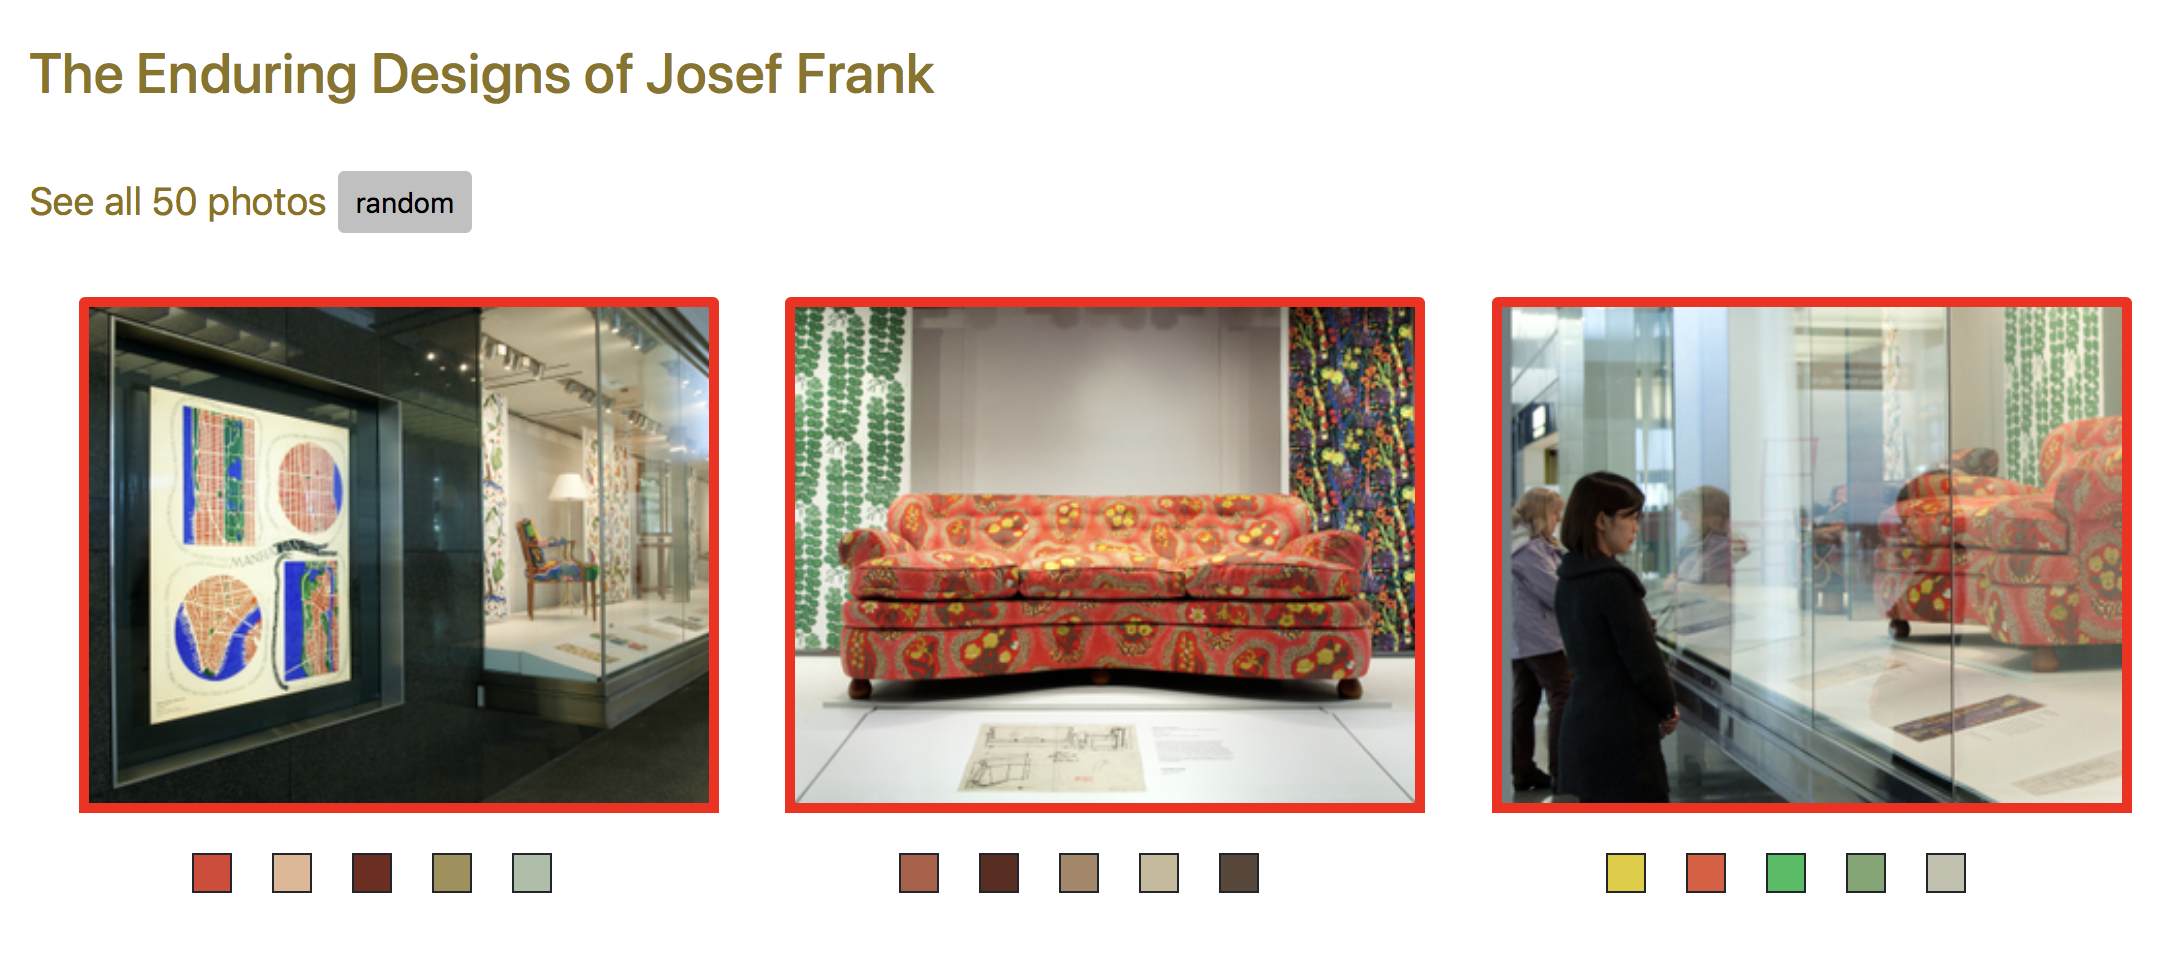 Thumbnails and color palettes of installation photos from the The Enduring Designs of Josef Frank exhibition